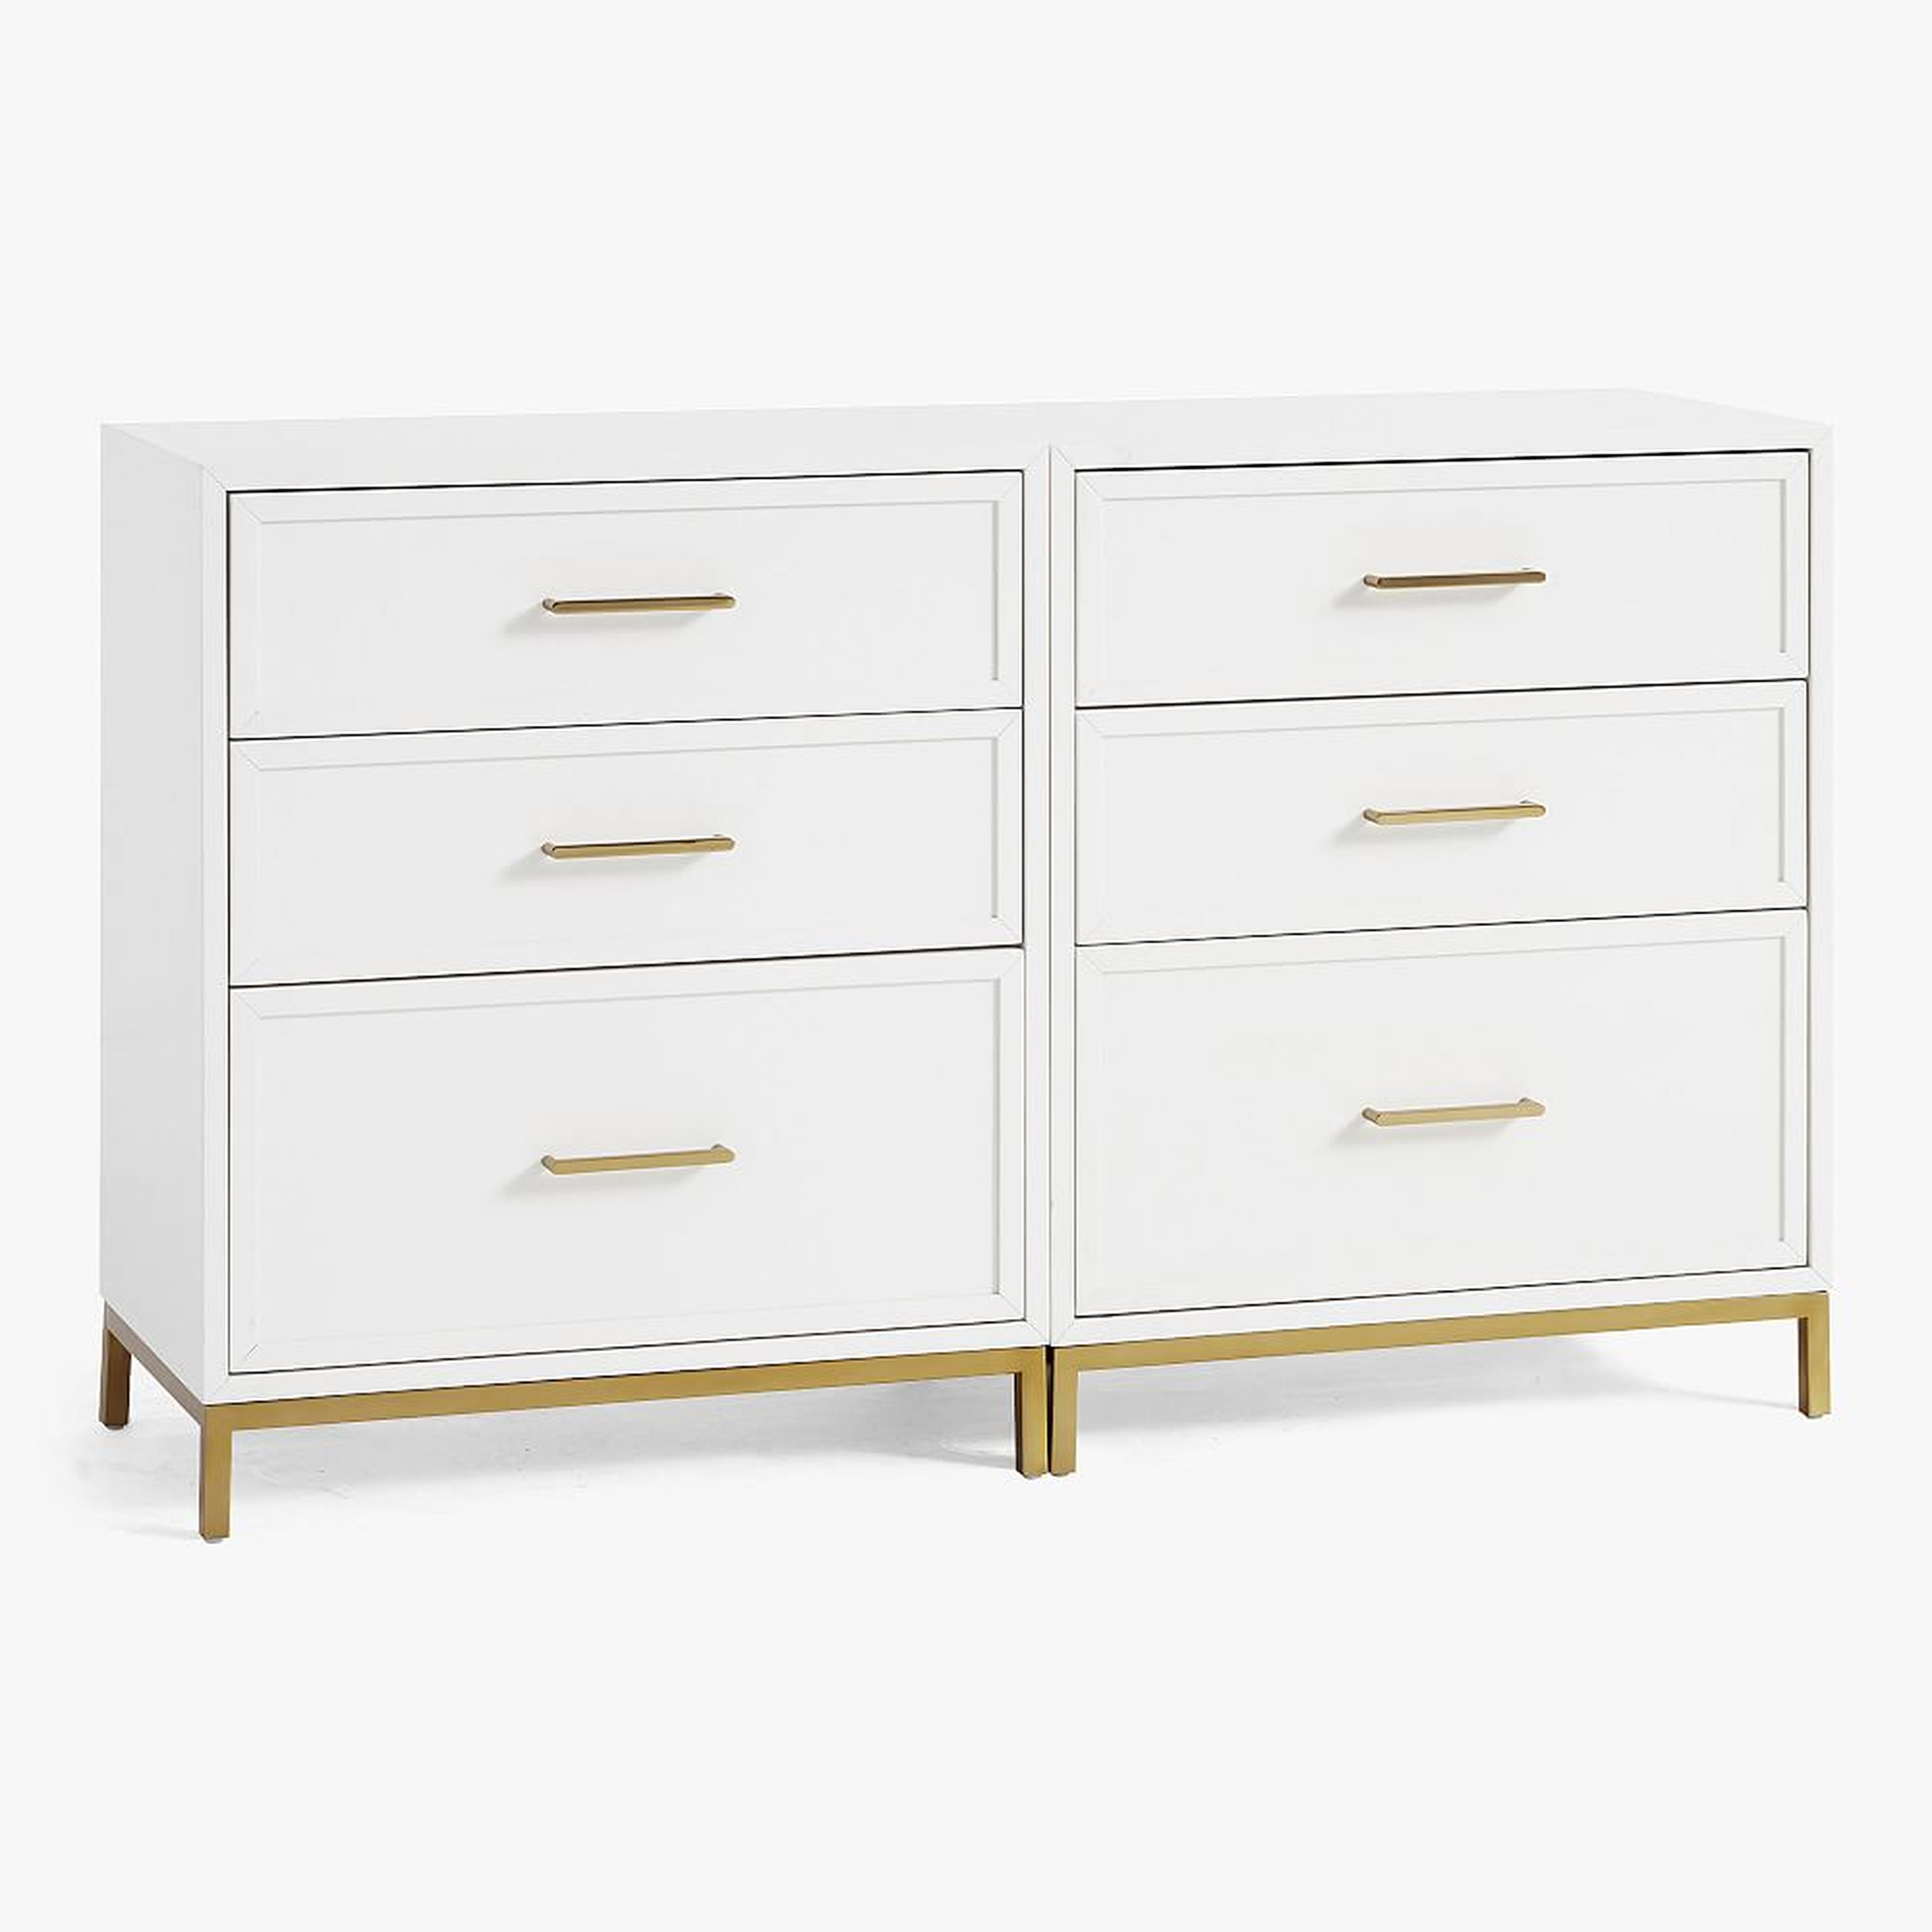 Blaire Double 3-Drawer Storage Cabinets, Simply White, White Glove In-Home - Pottery Barn Teen